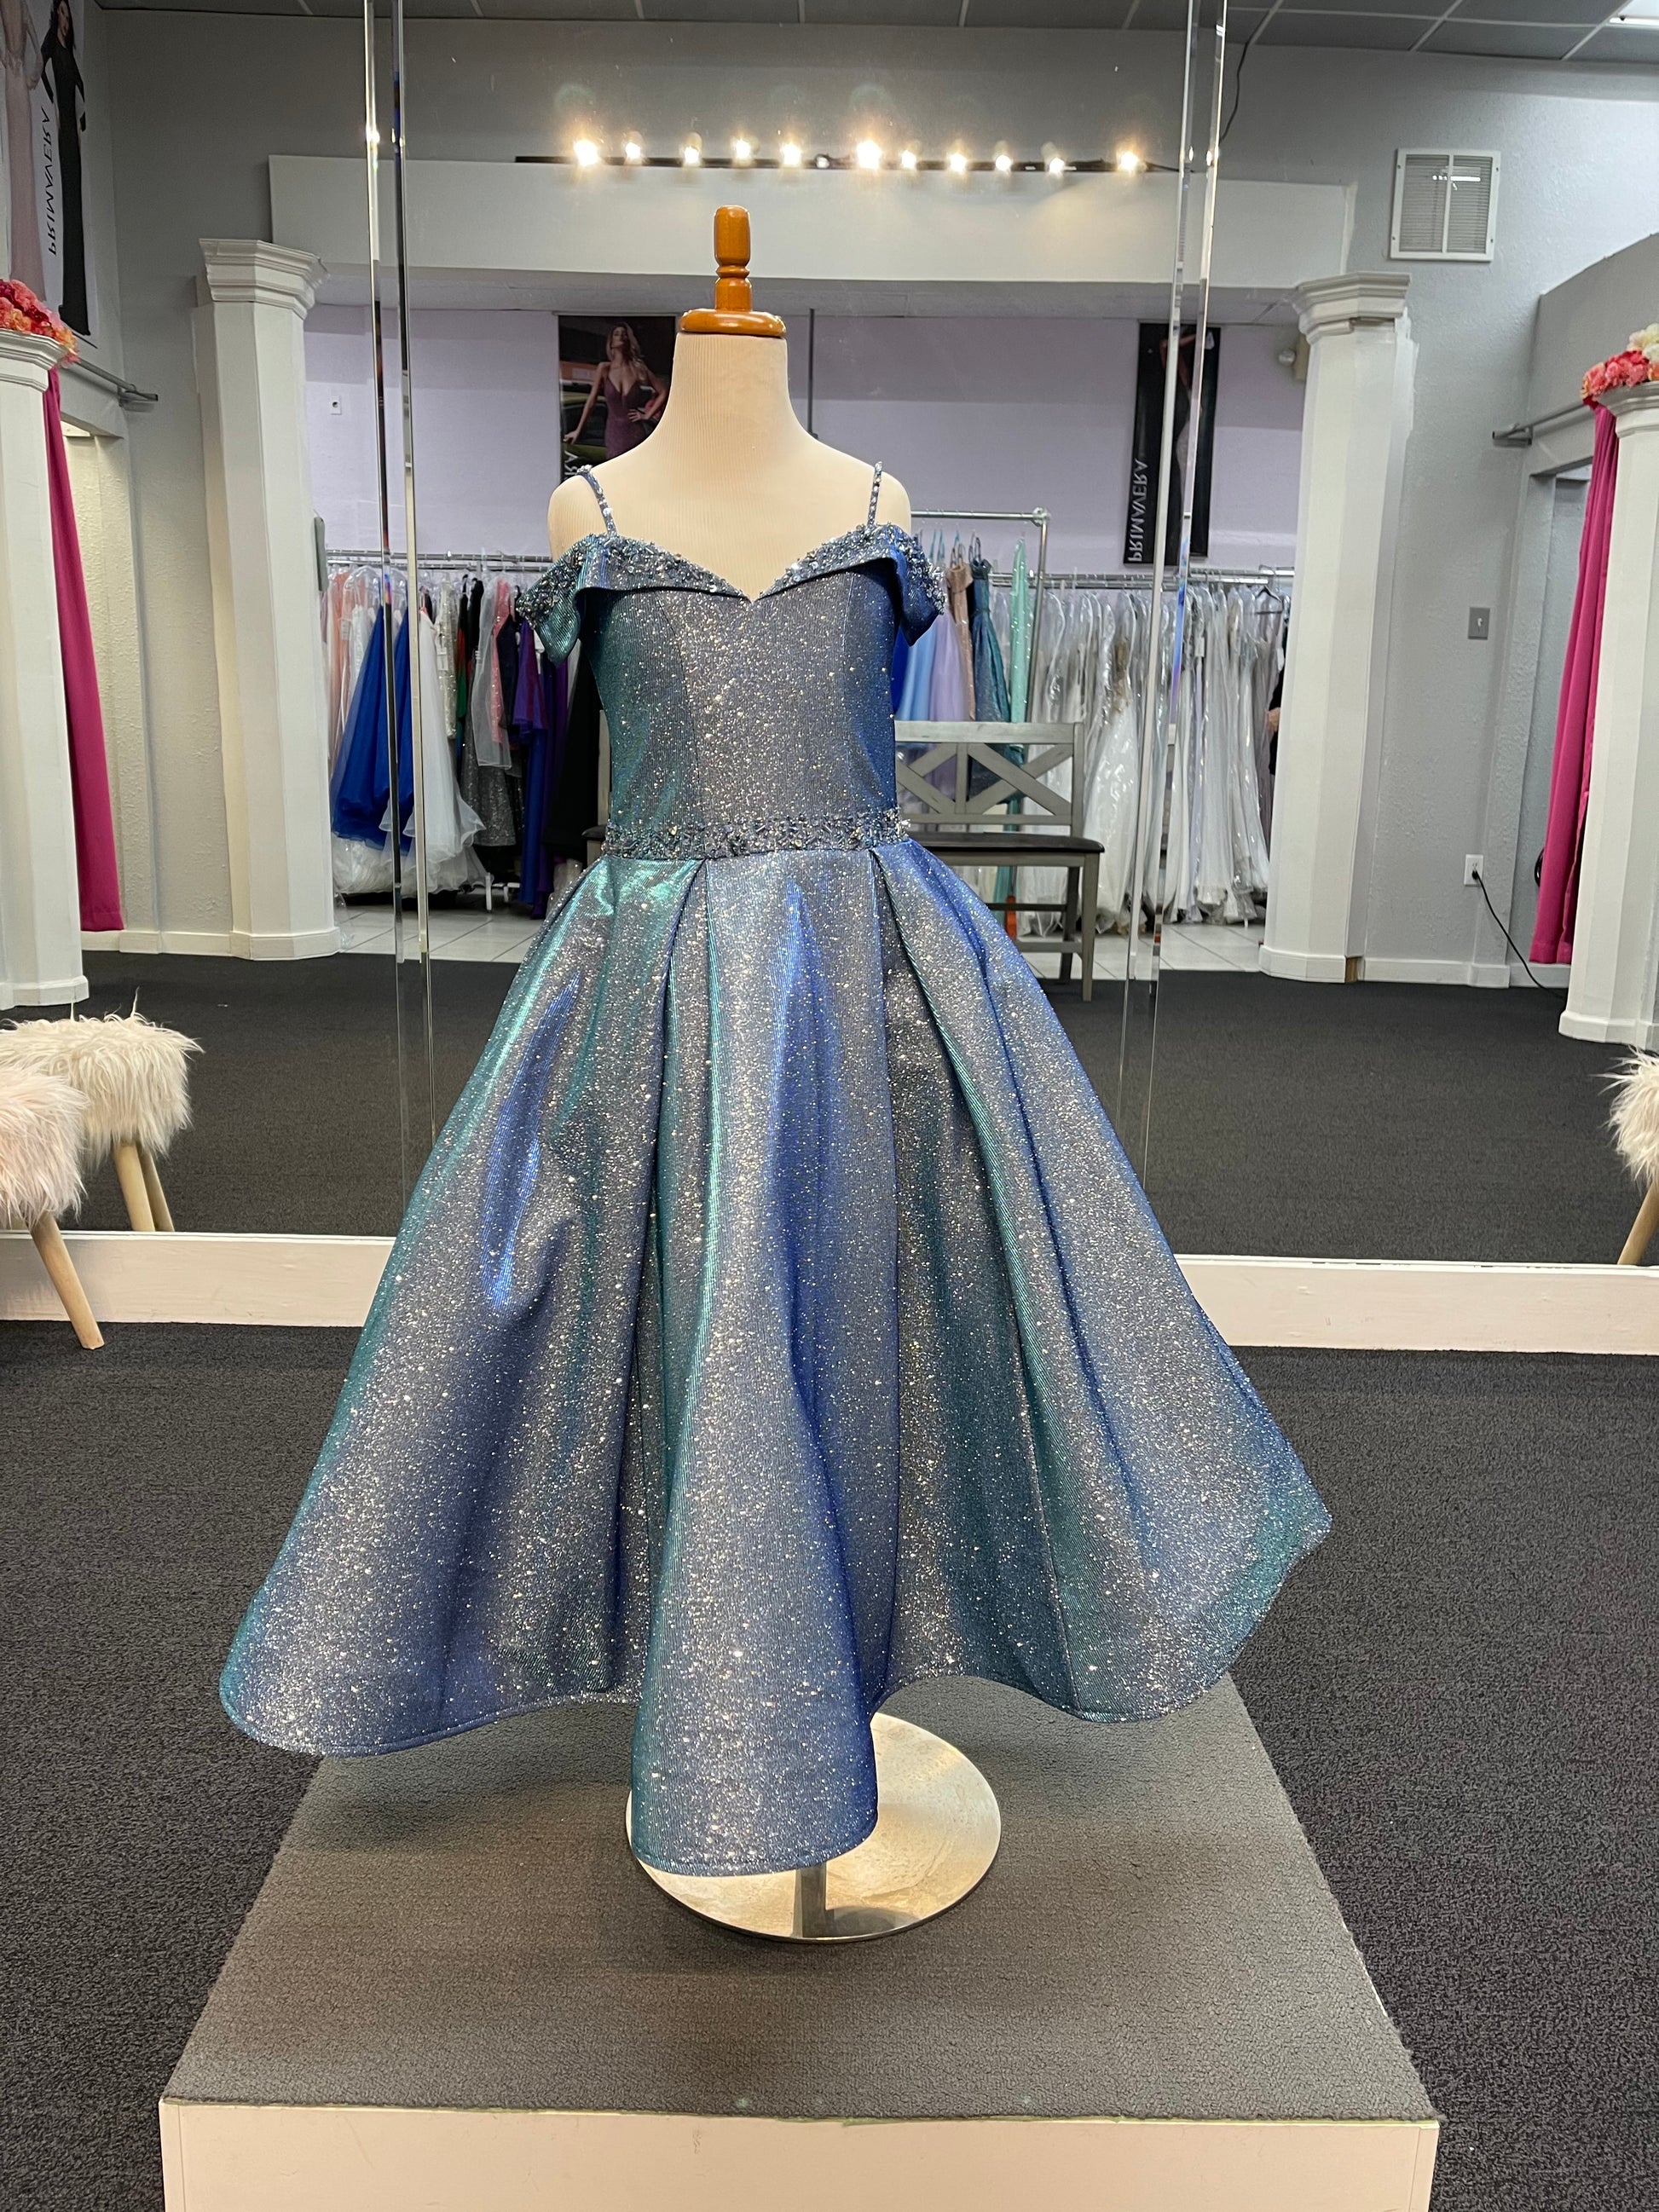 Dancing Queen K743 Off the shoulder girls long pageant dress or party dress iridescent shimmer A line Gown.  Color: Blue  Size: 6